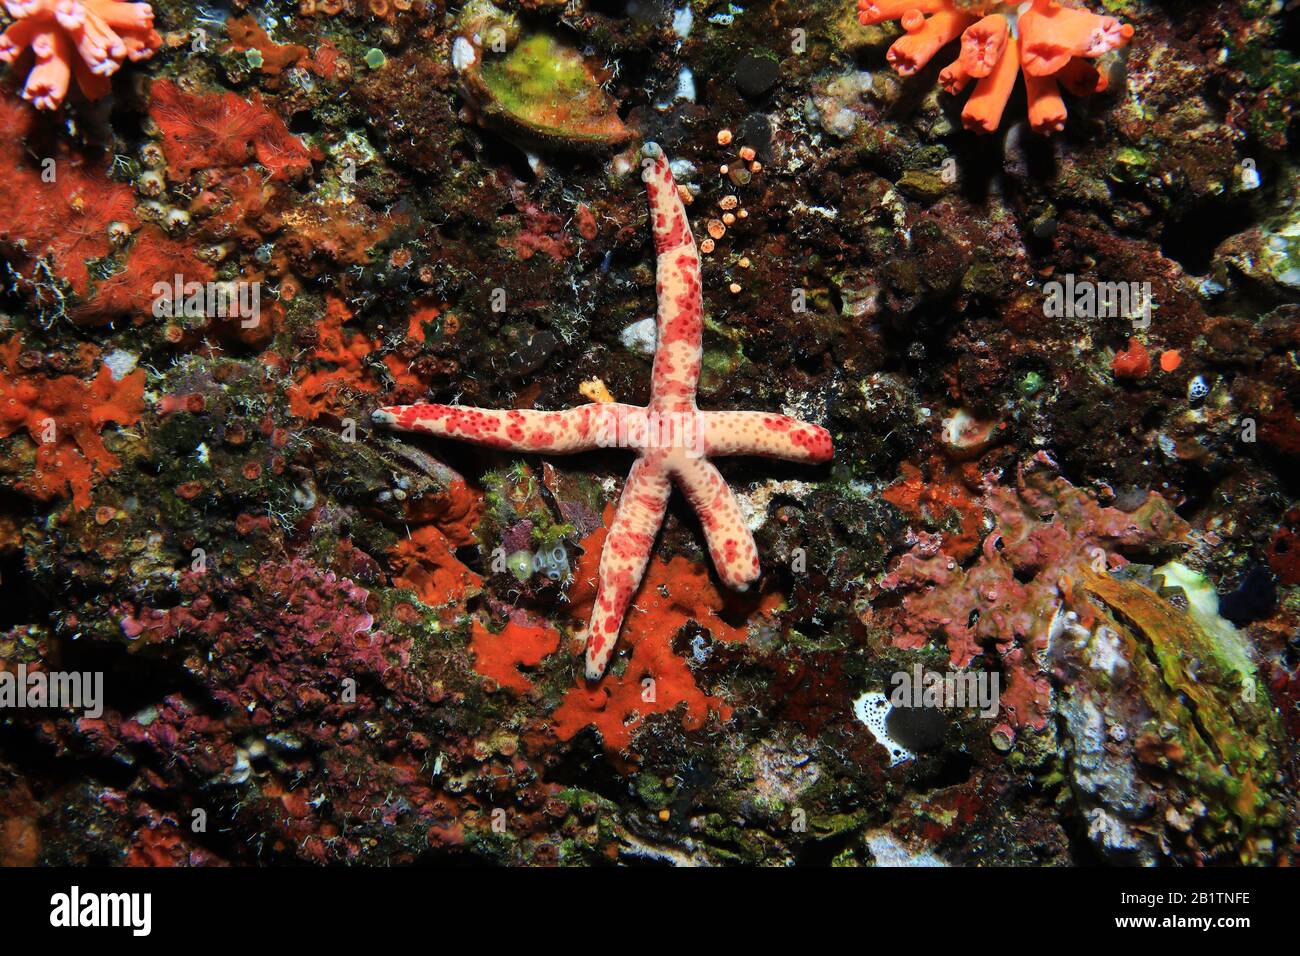 Spotted linckia sea star (Linckia multifora) underwater in the tropical coral reef of the indian ocean Stock Photo